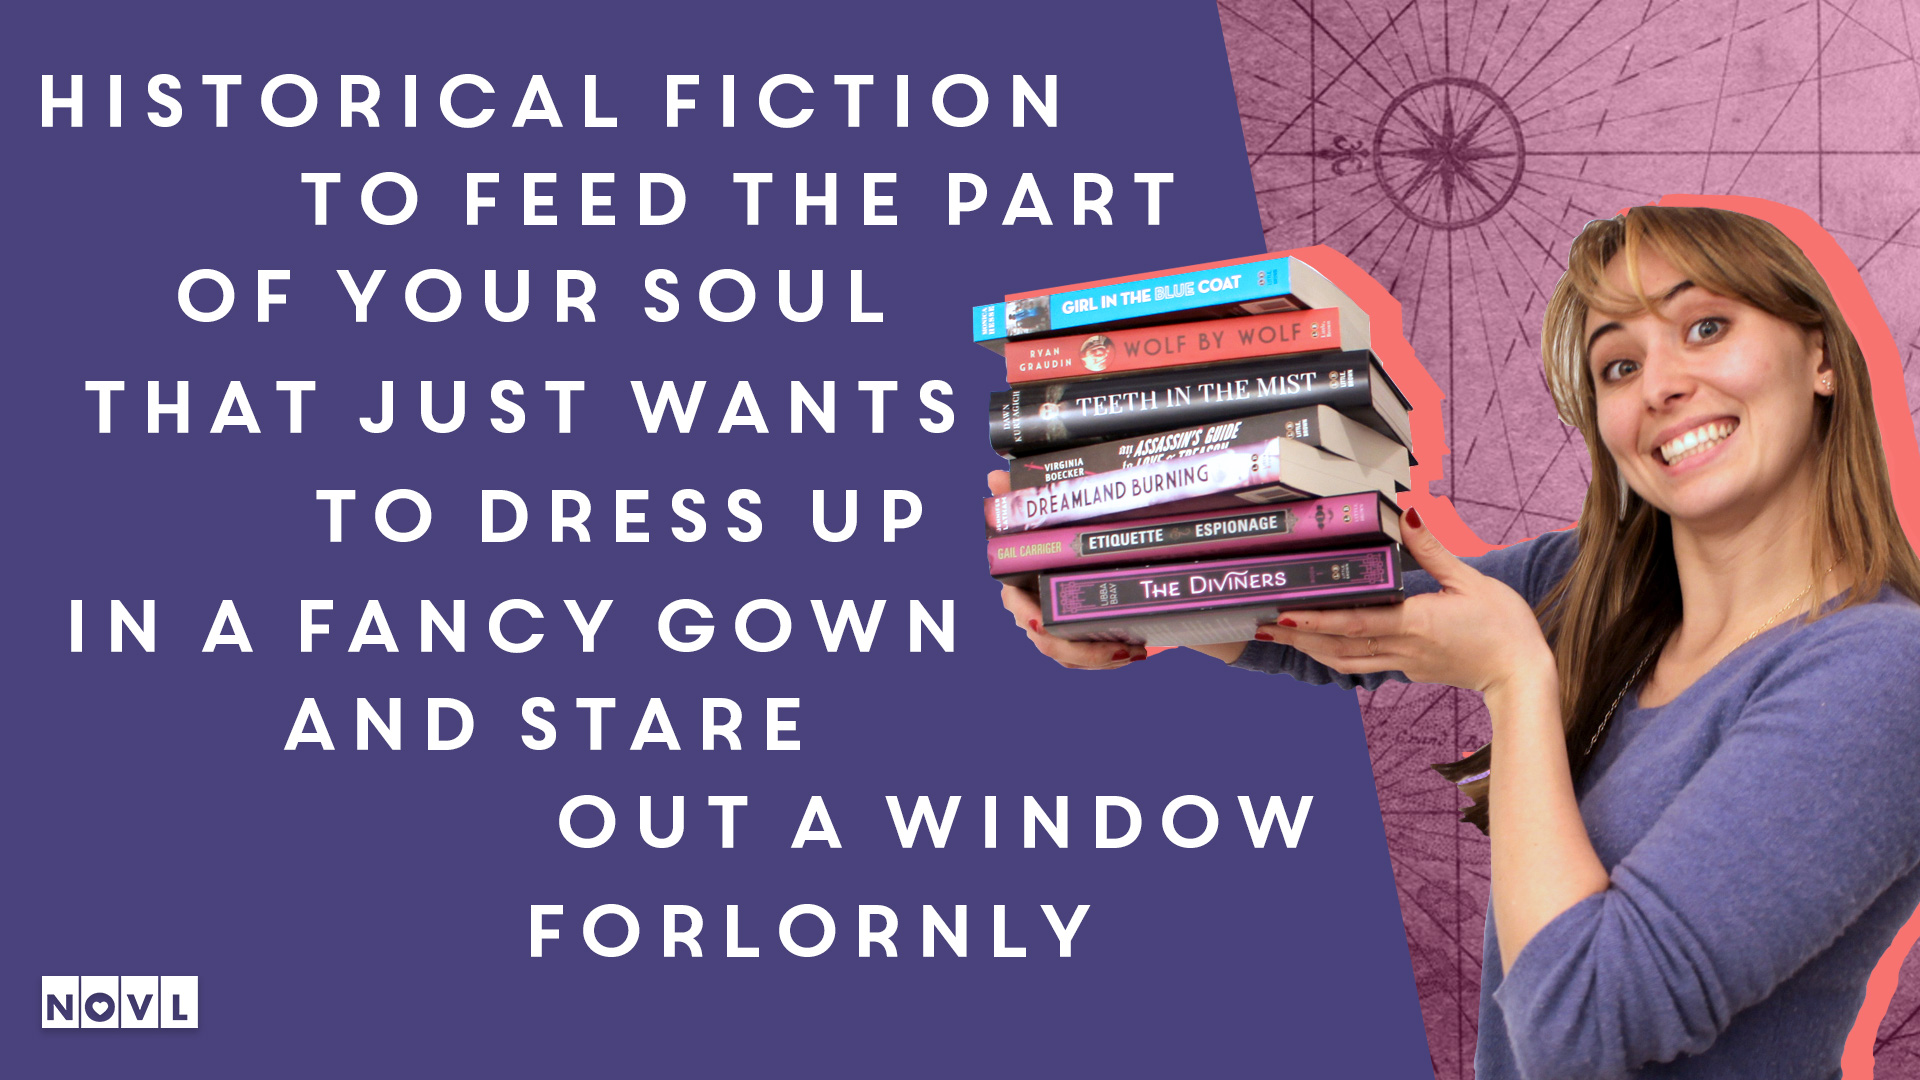 The NOVL Blog, Featured Image for Article: Historical fiction to feed the part of your soul that just wants to dress up in a fancy gown and stare out a window forlornly